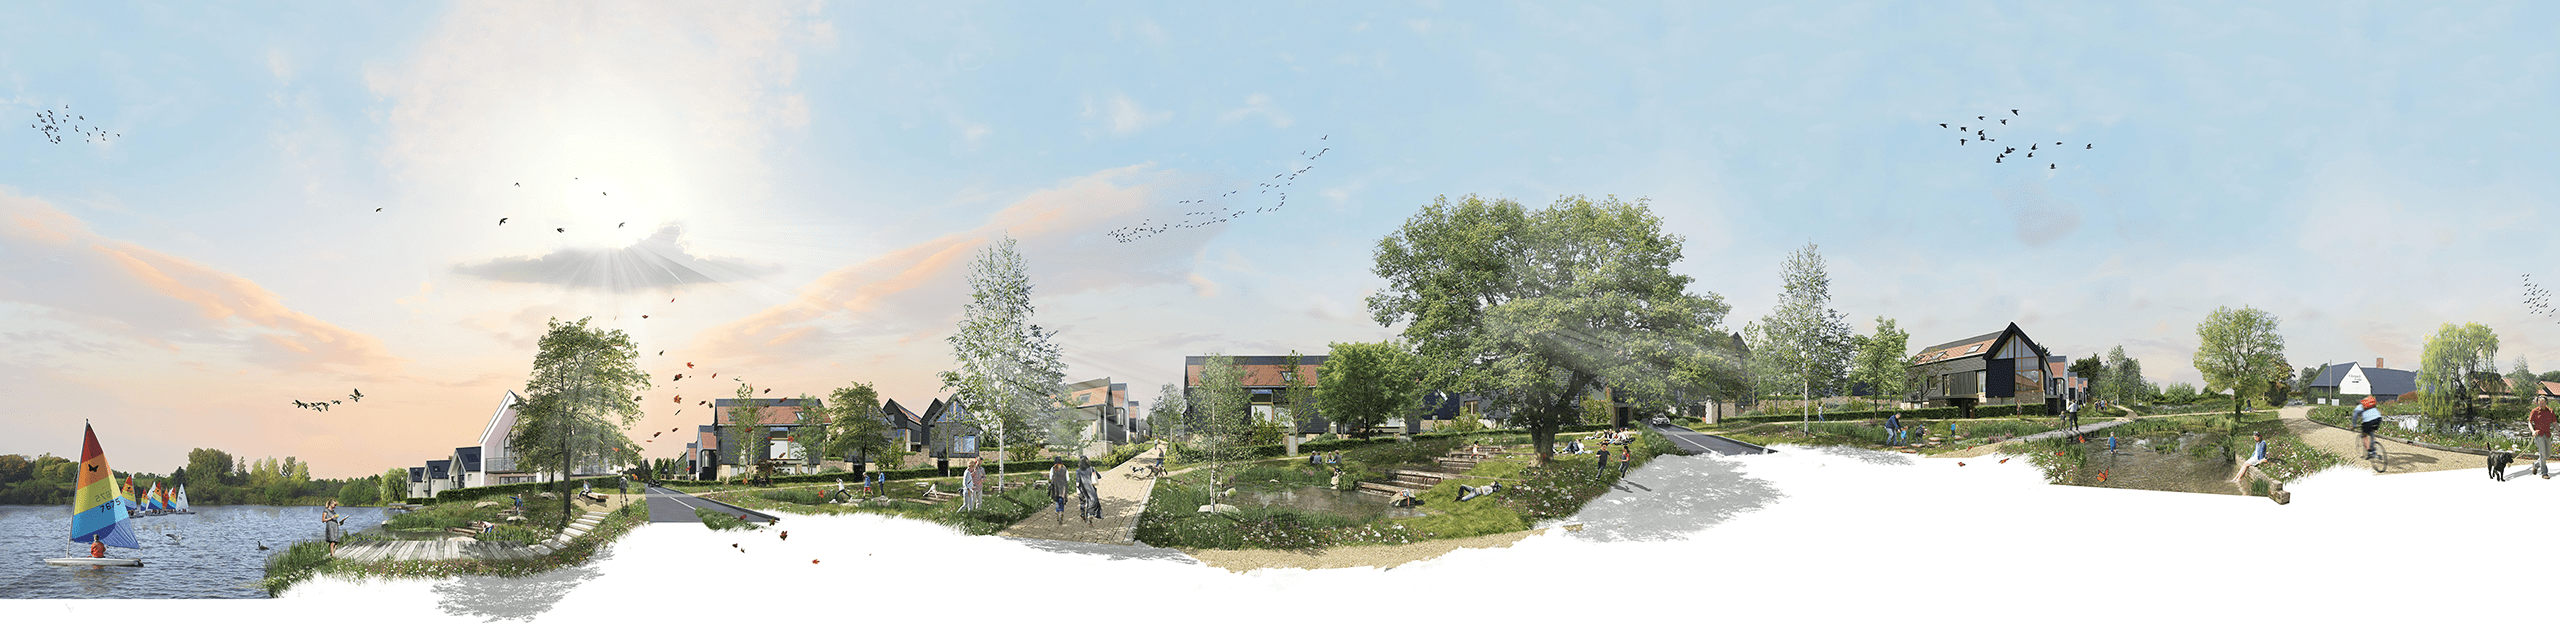 A photomontage section cutting through one of the key open spaces at Chelmsford Garden Community, showing the change in levels from the top of the site down to the lakeside. © BMD